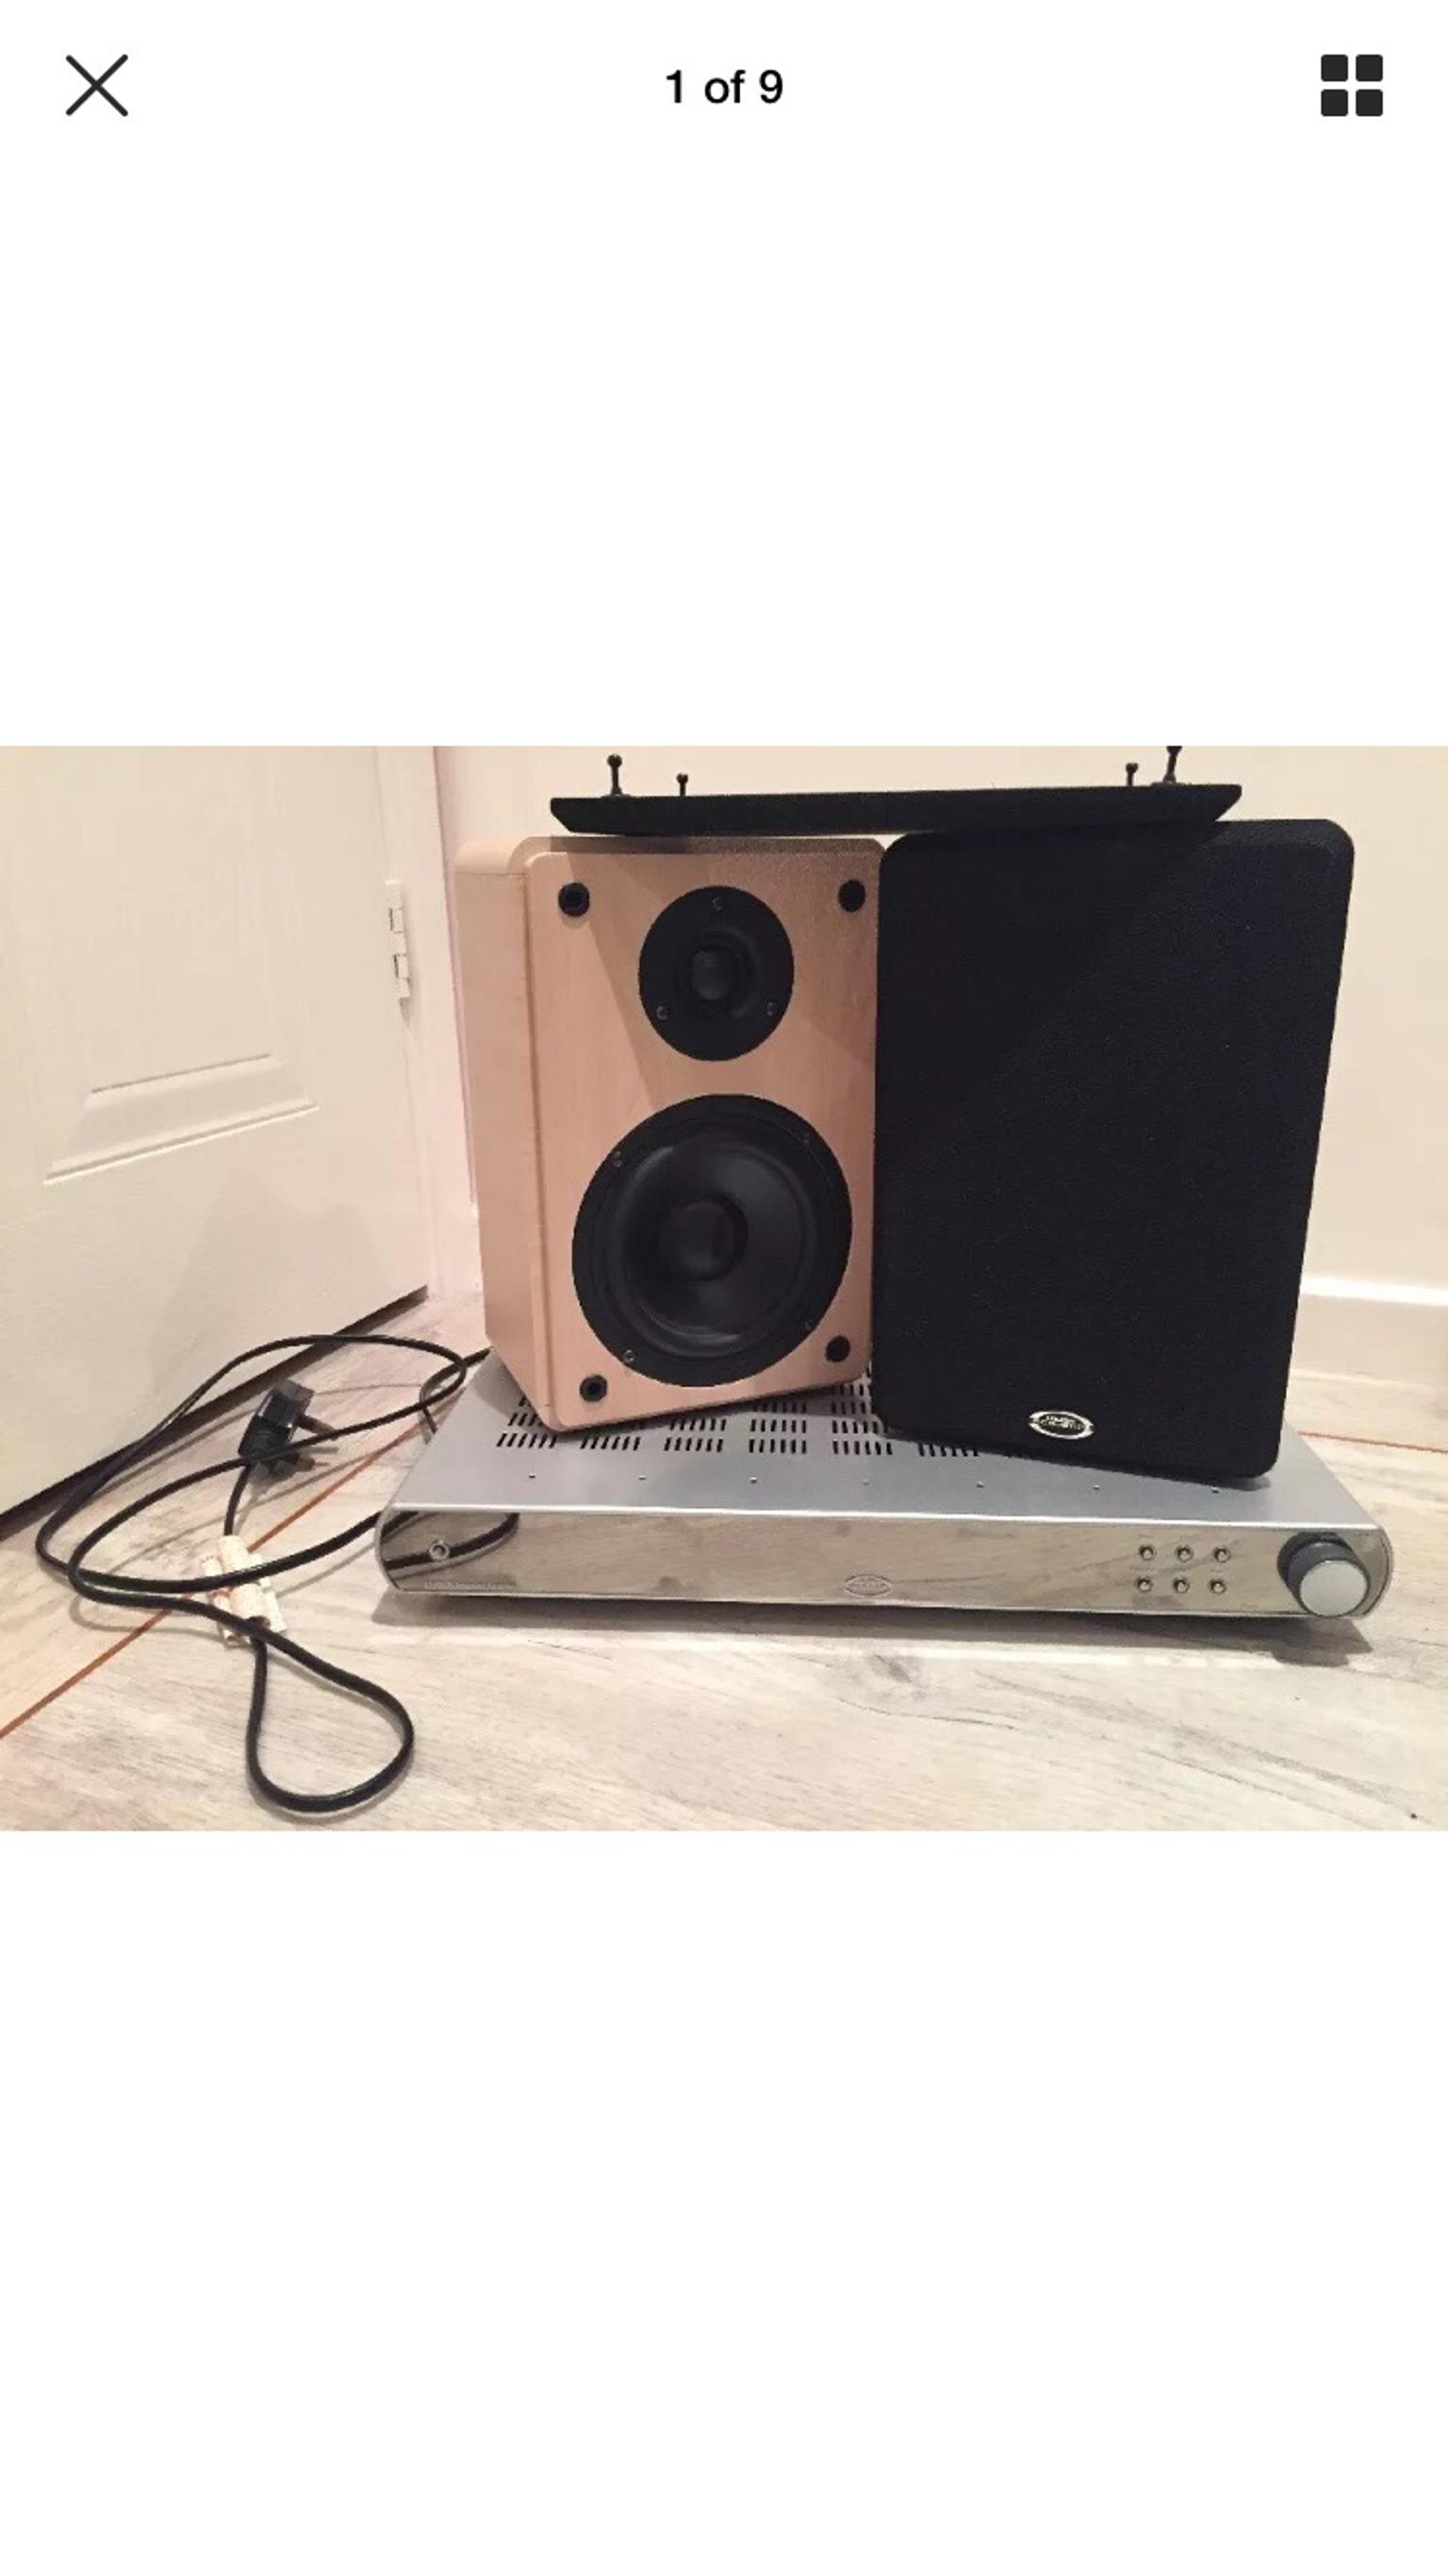 Bush Acoustics Amplifier Amp And Speakers In Dy1 Dudley Fur 35 00